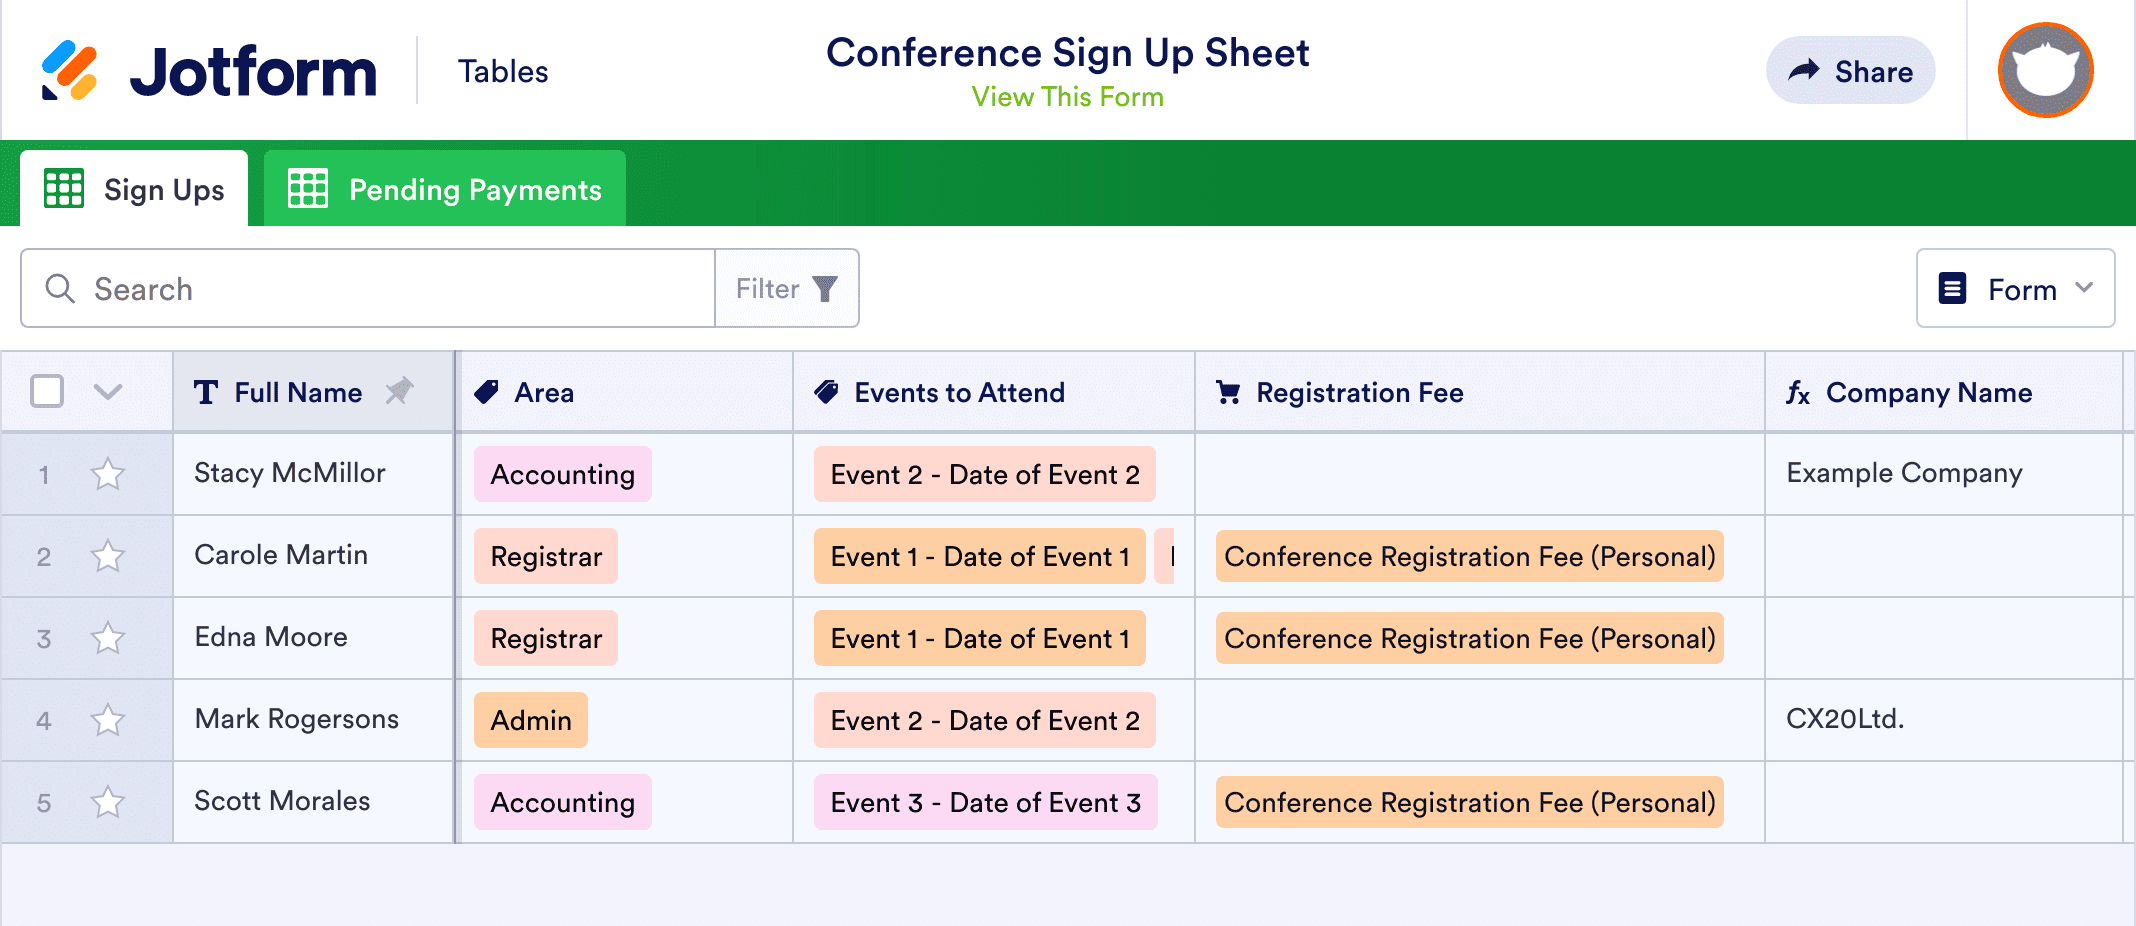 Conference Sign Up Sheet